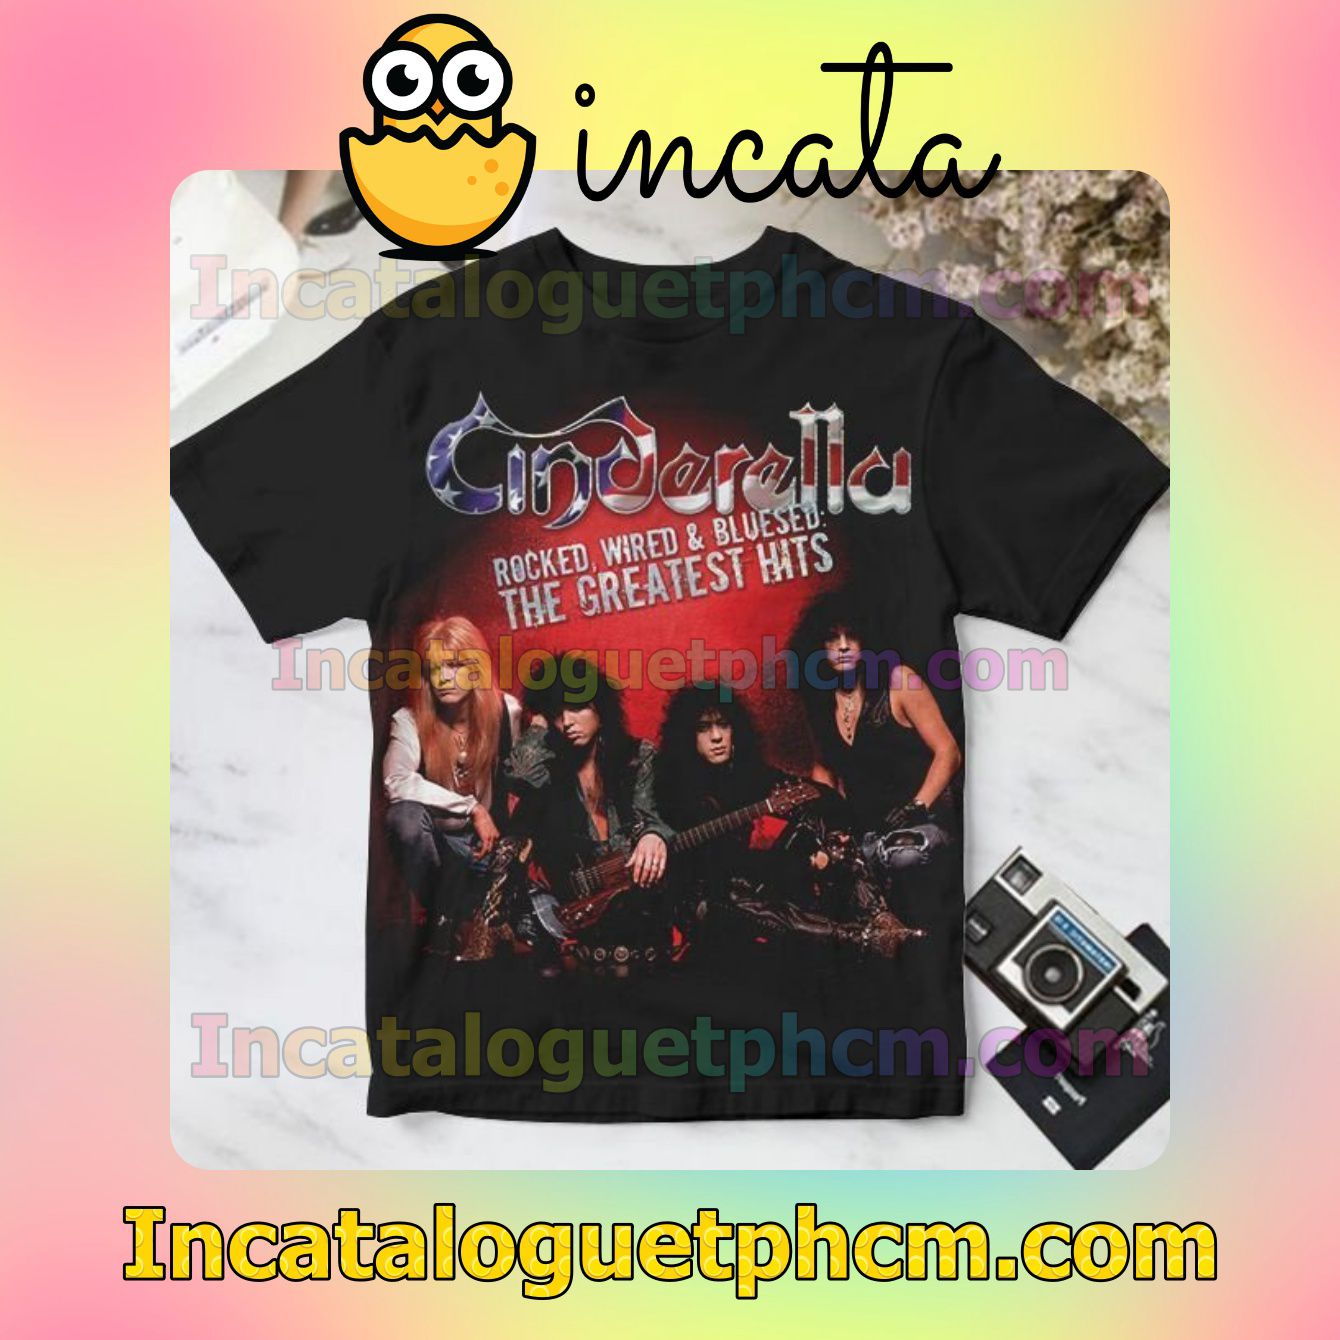 Cinderella Rocked, Wired And Bluesed The Greatest Hits Album Cover Personalized Shirt